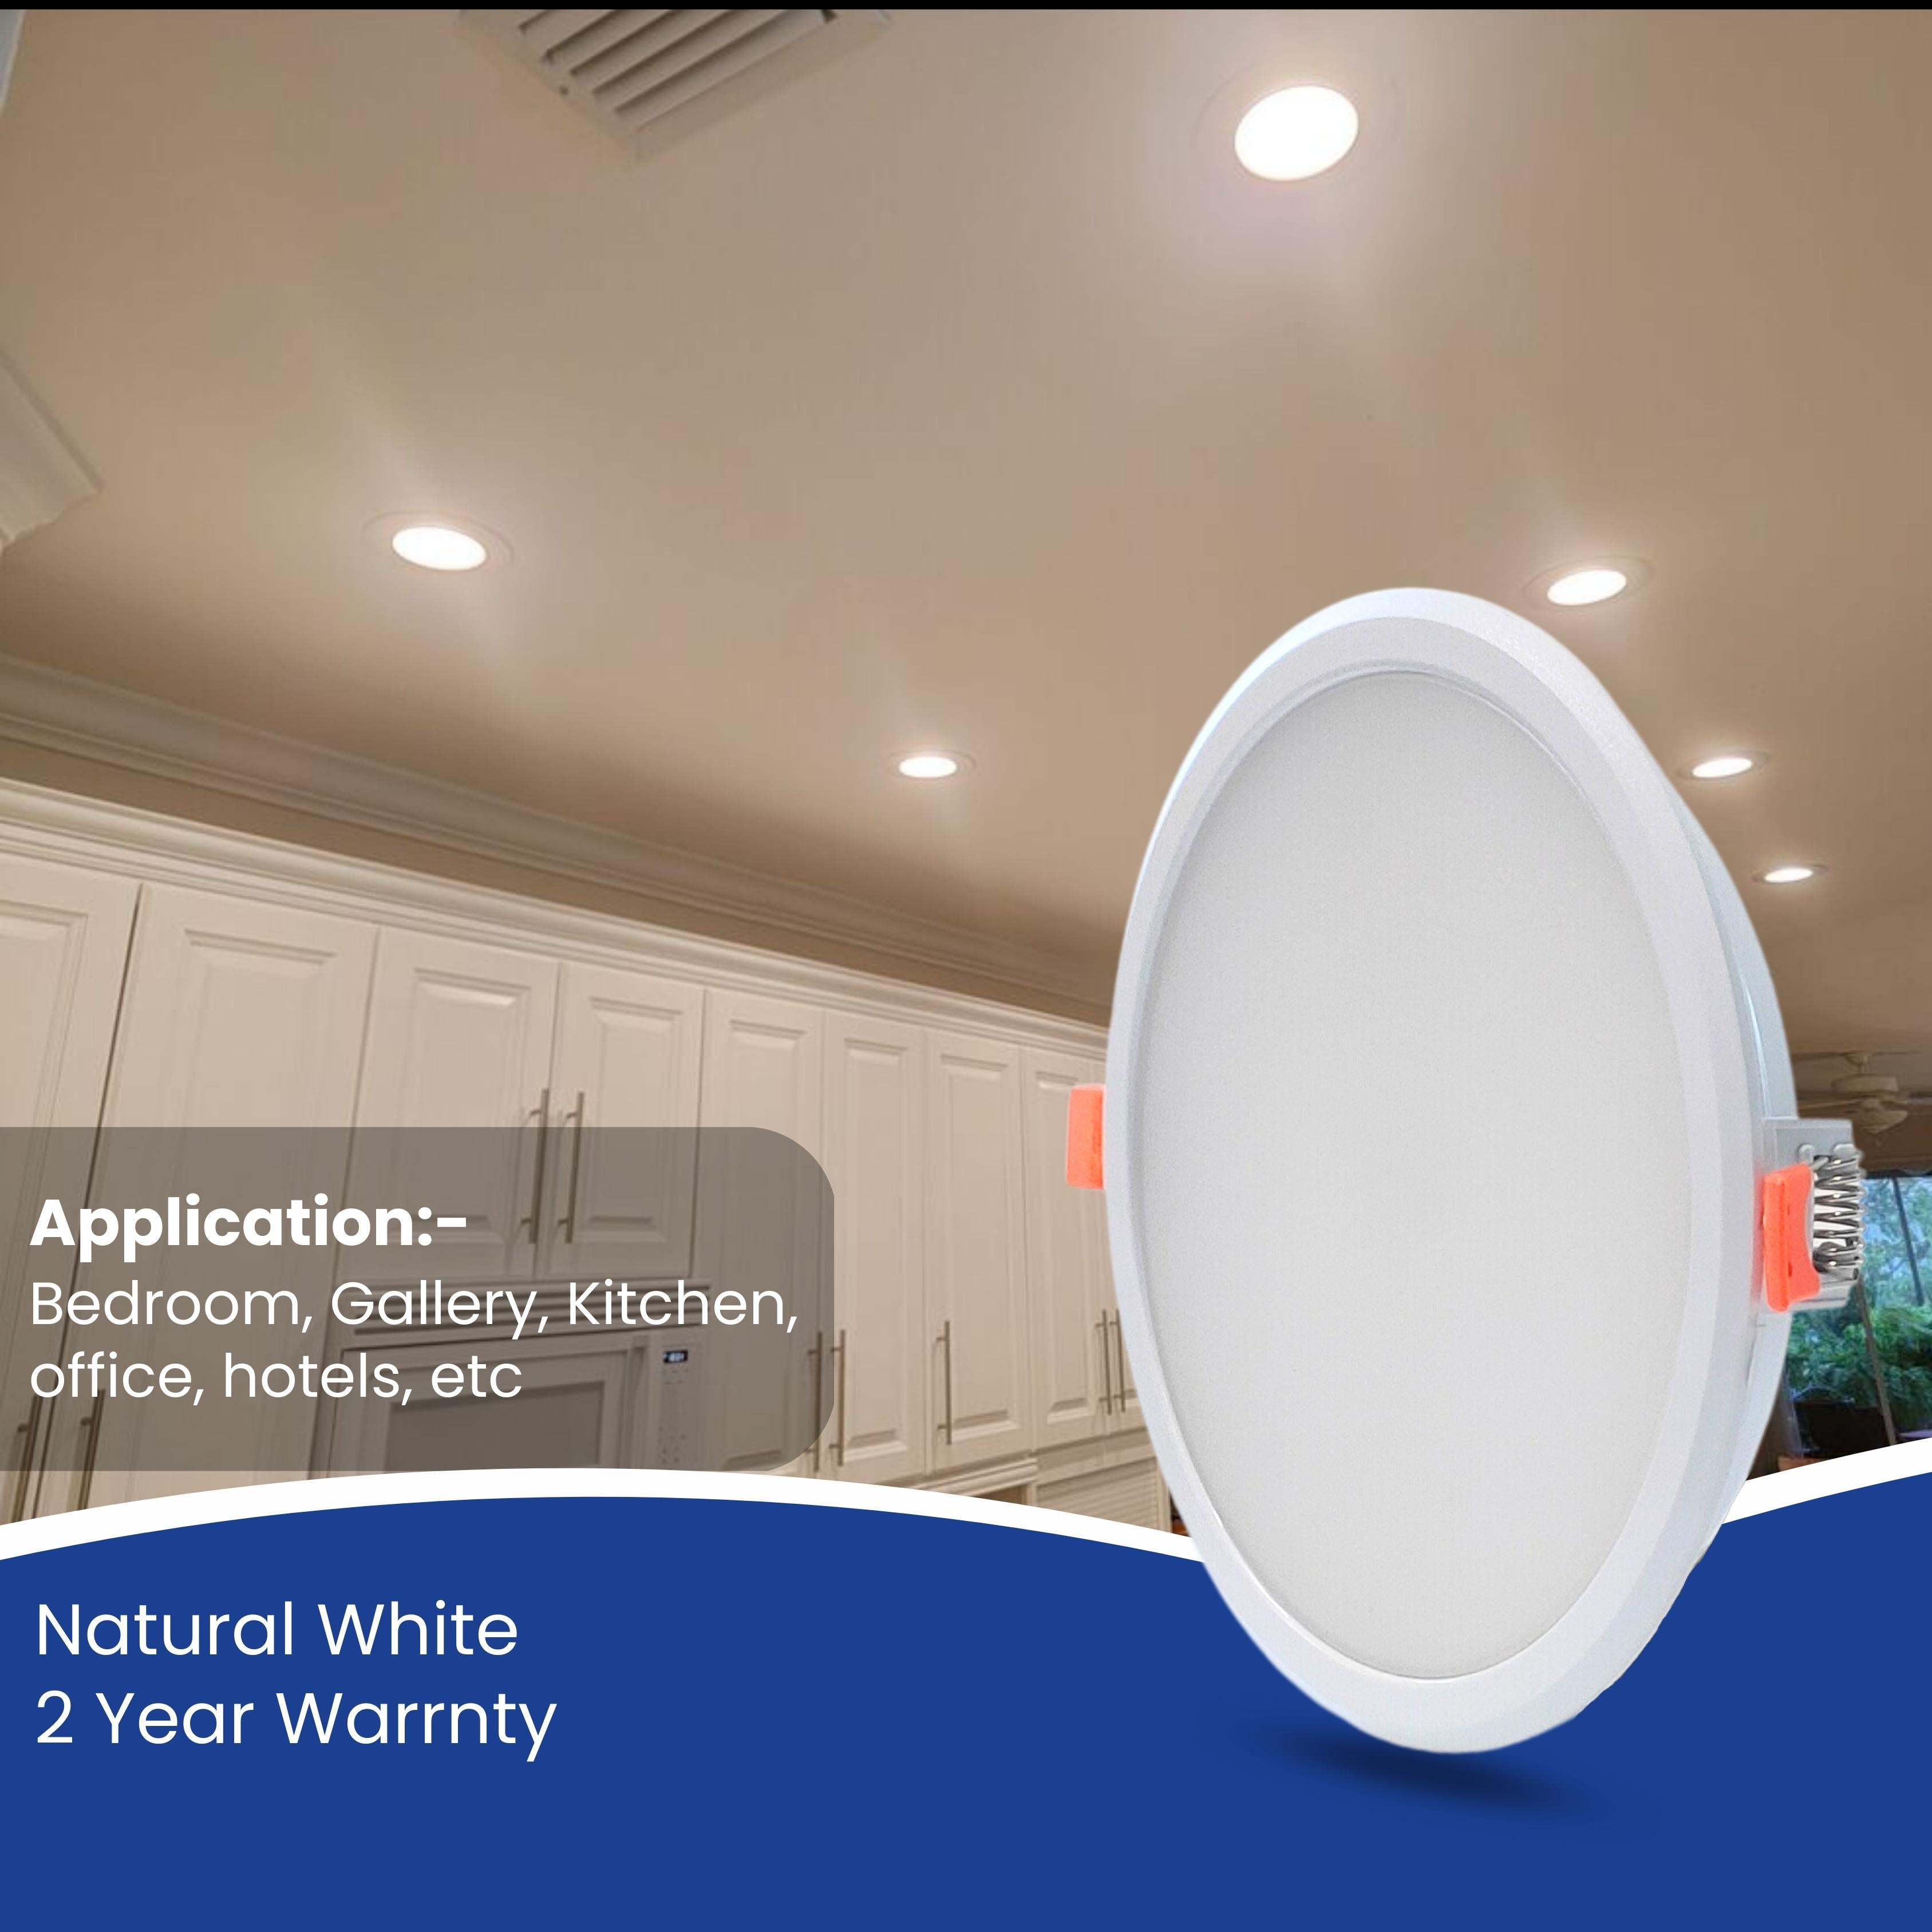 22 Watt LED Conceal PC (Poly Carbonate) Panel Light For POP / Recessed Lighting